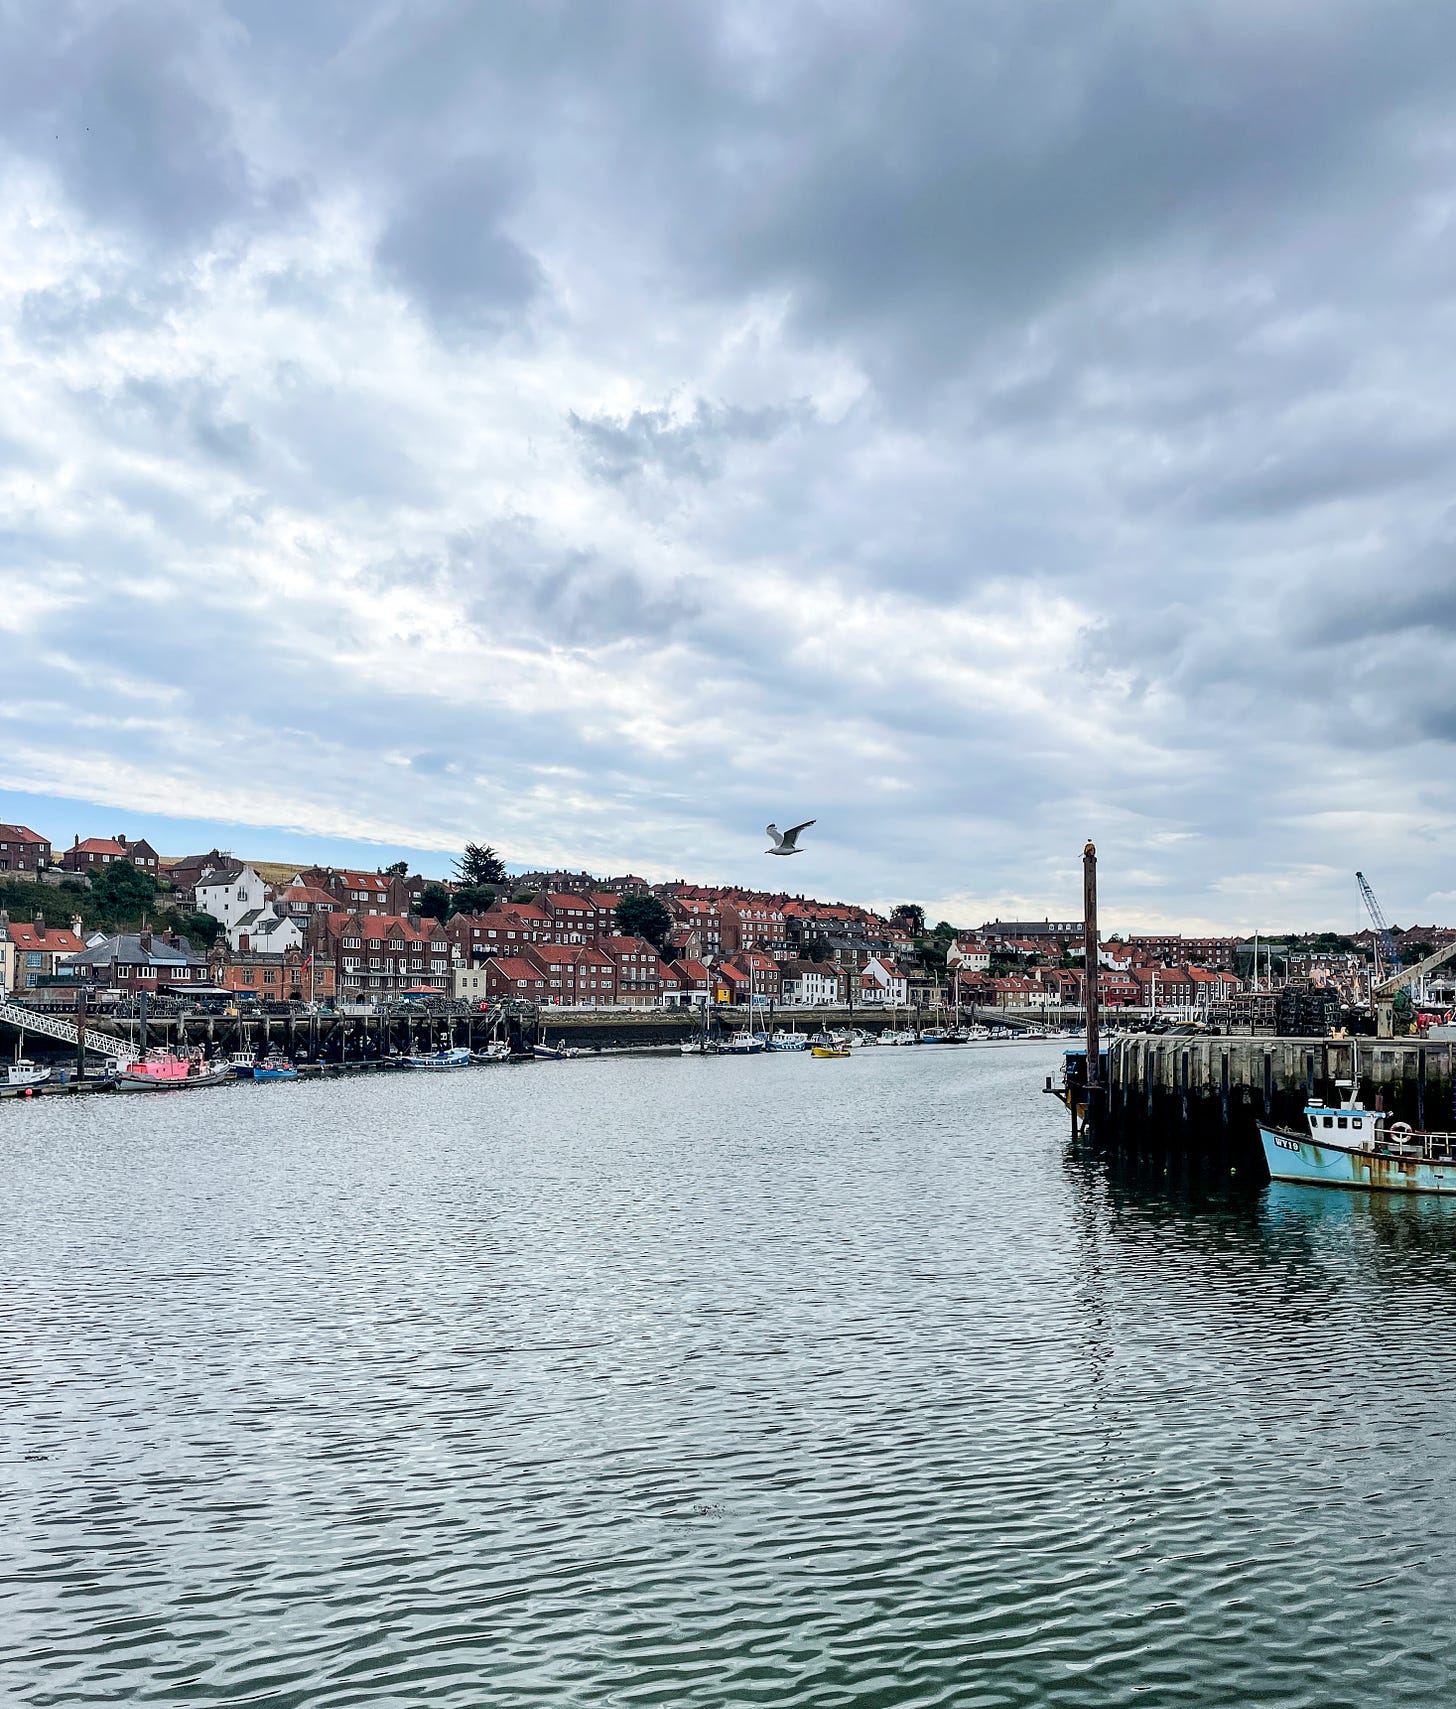 The harbor at Whitby, England